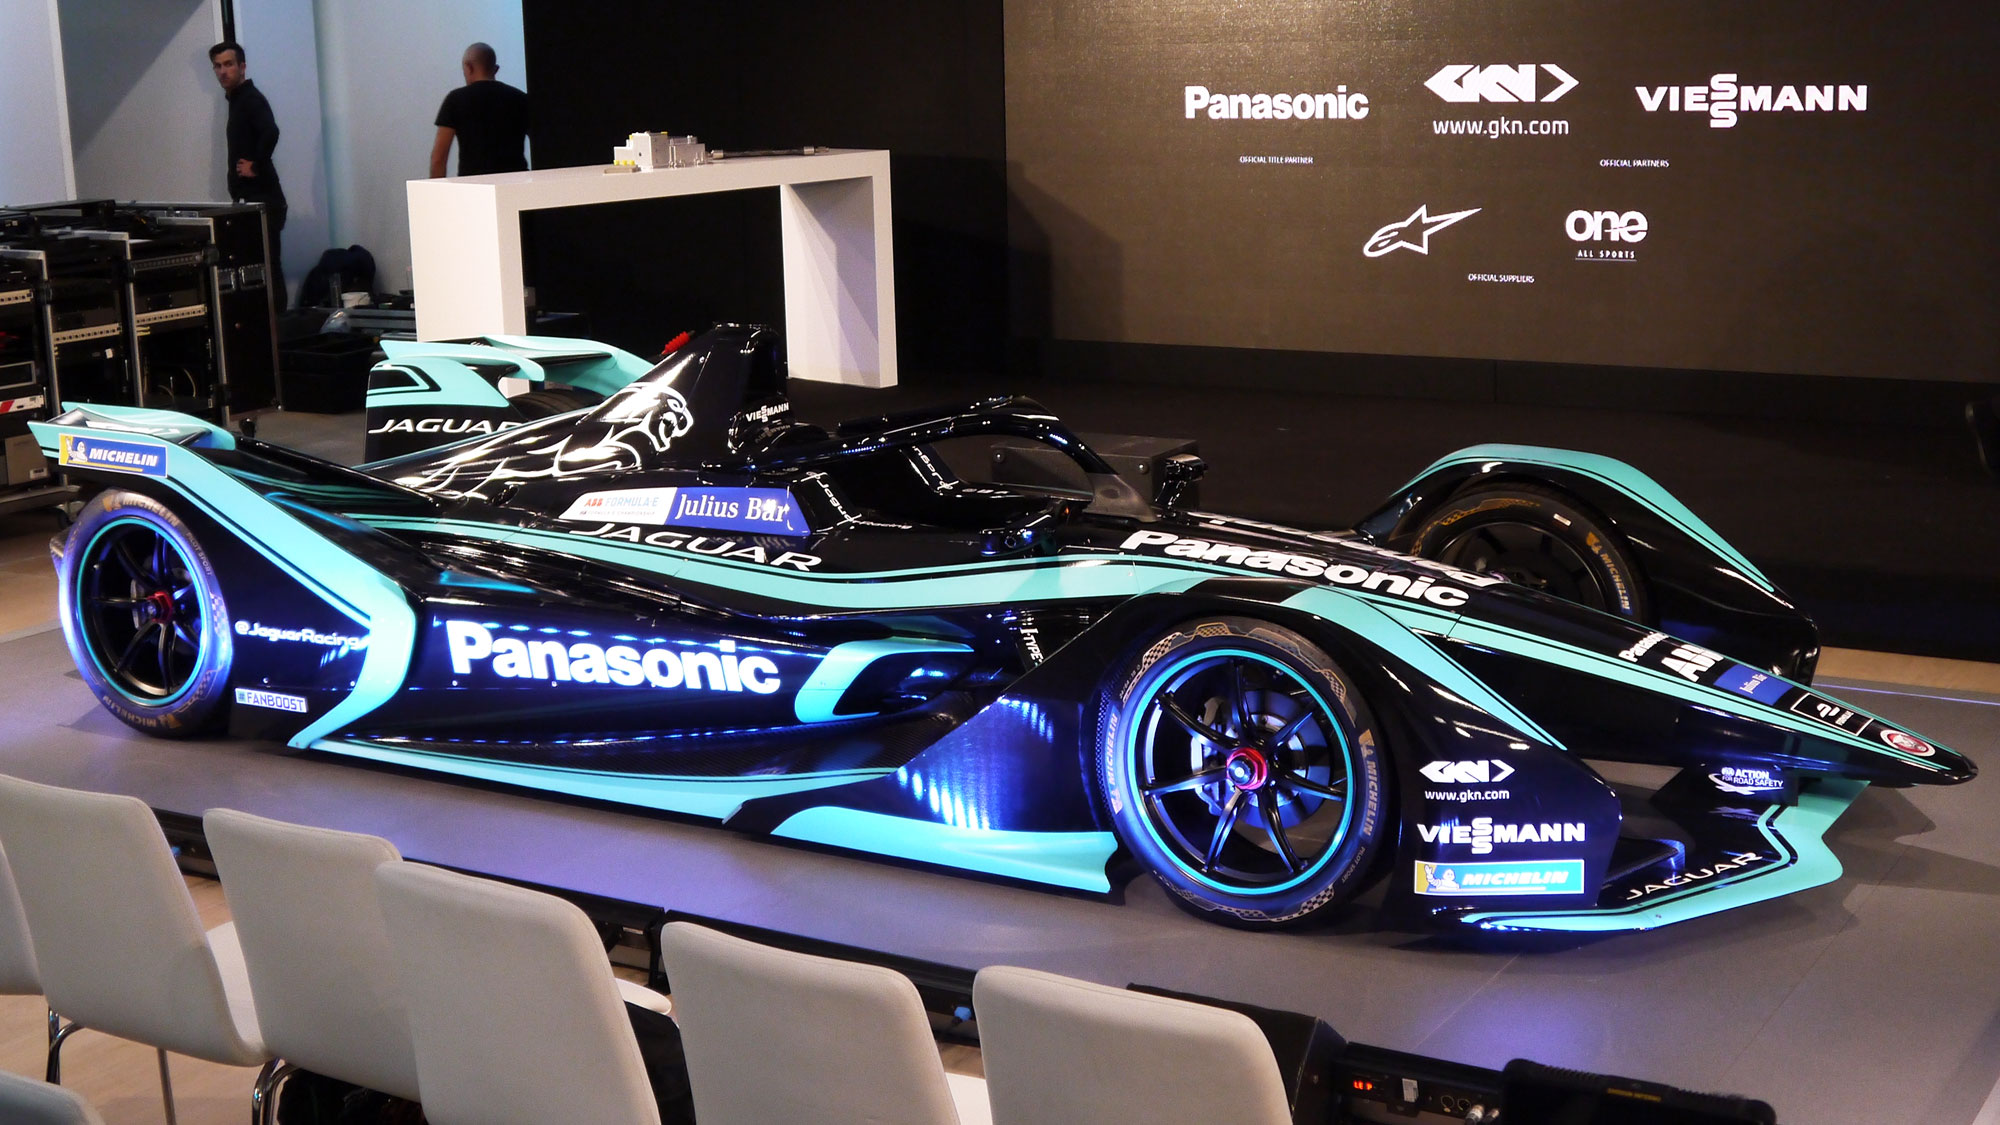 jaguars i type 3 formula e race car is a good sign for your future electric vehicle